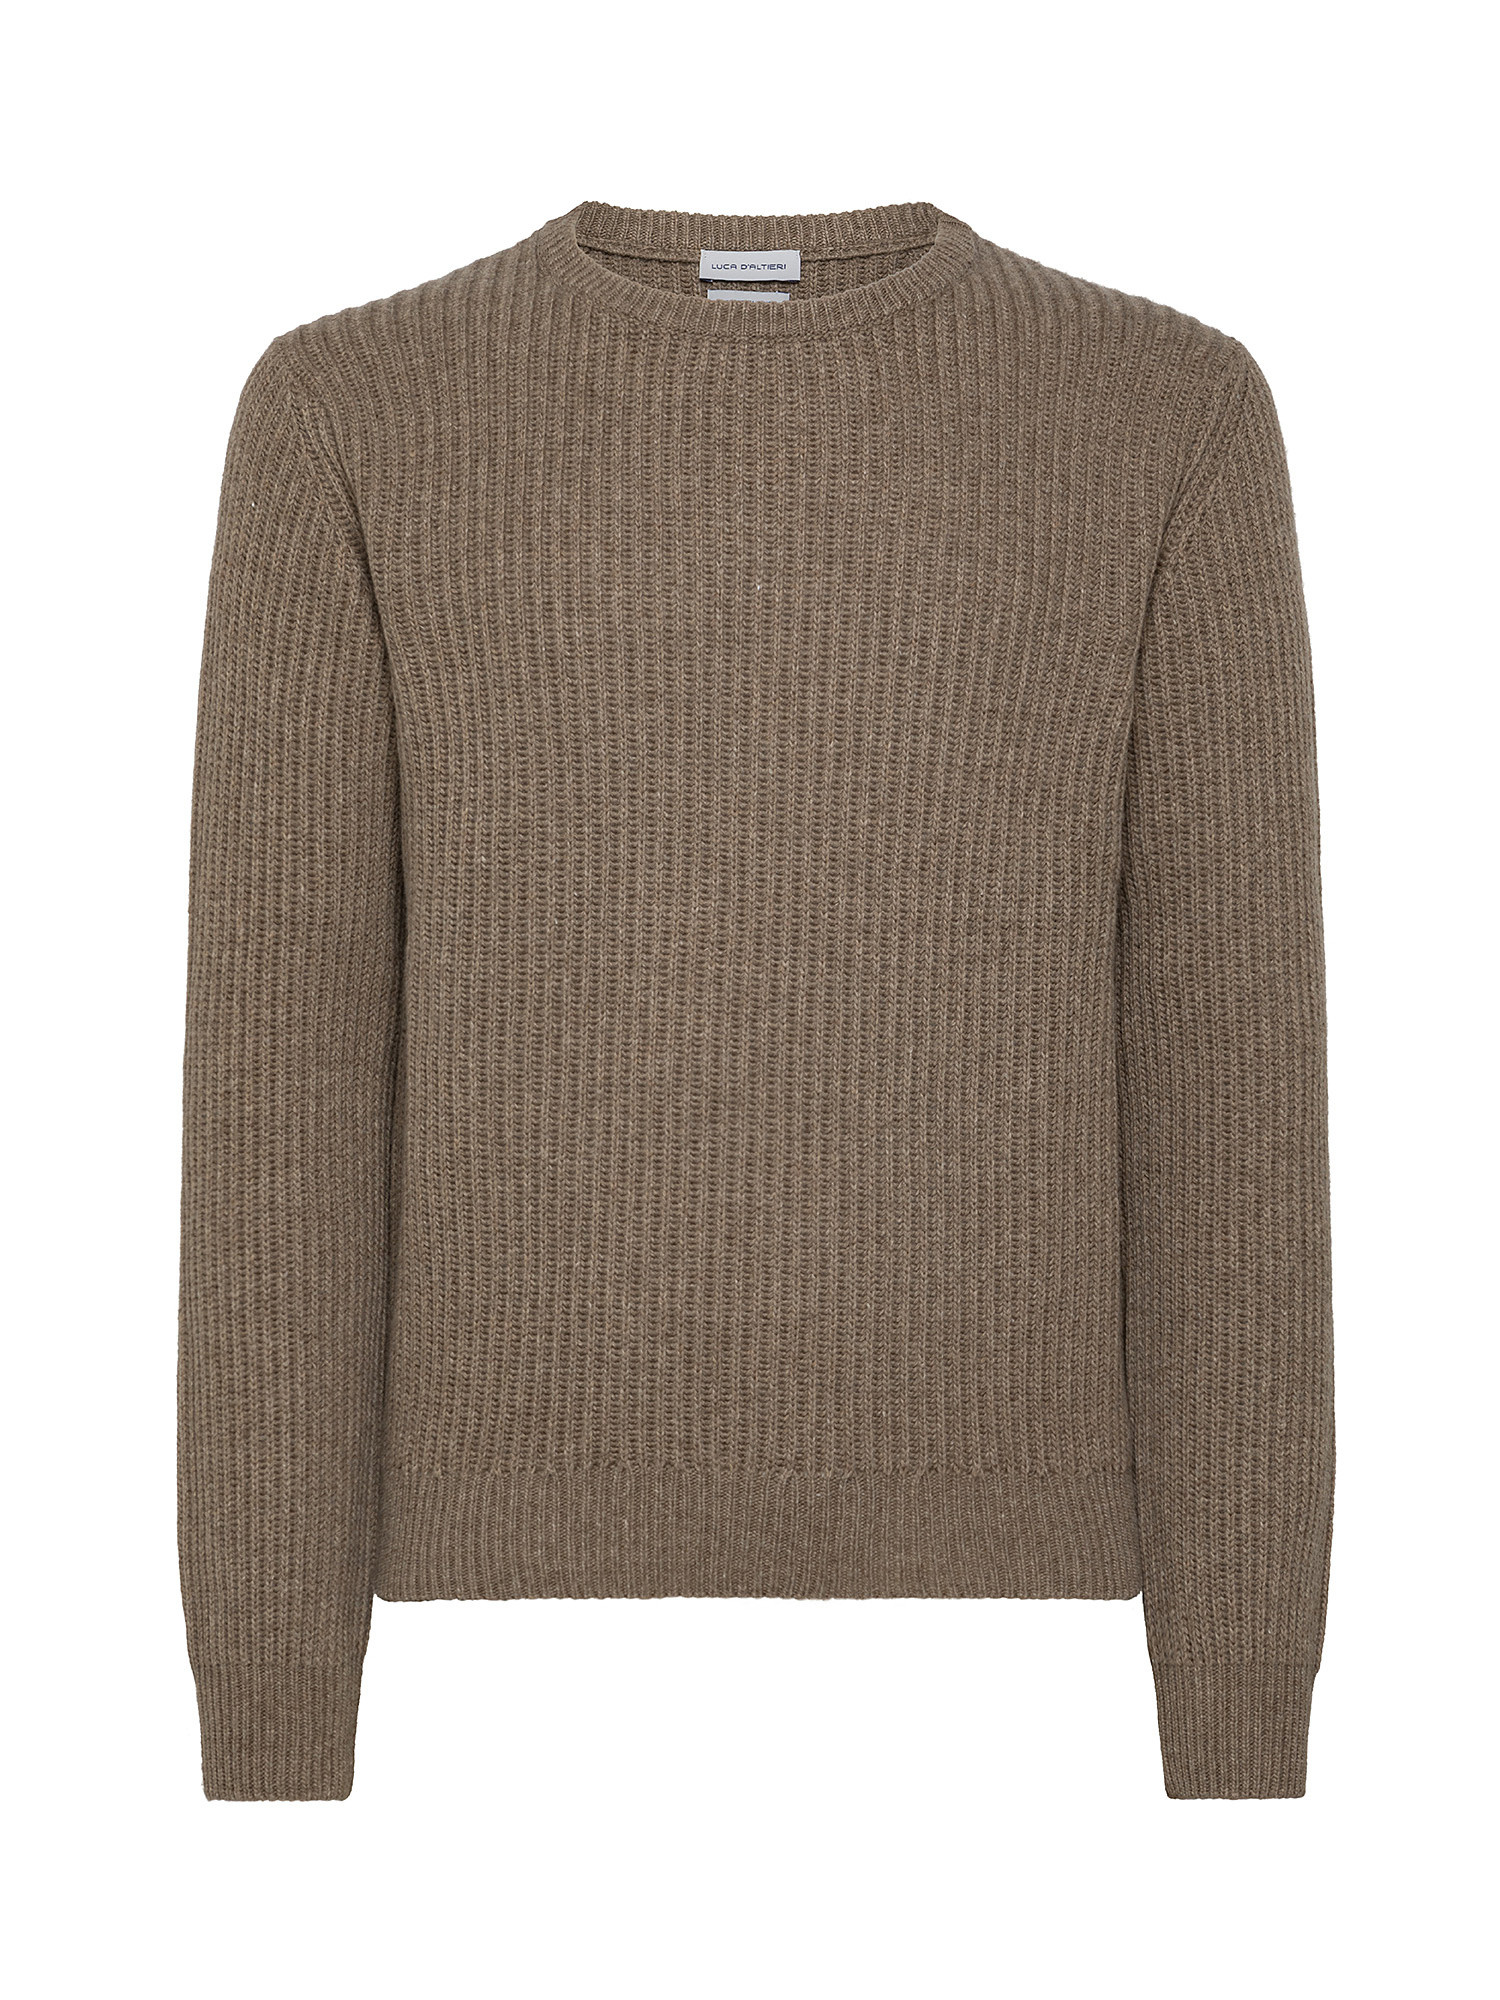 Crewneck sweater with noble fibers, Beige, large image number 0